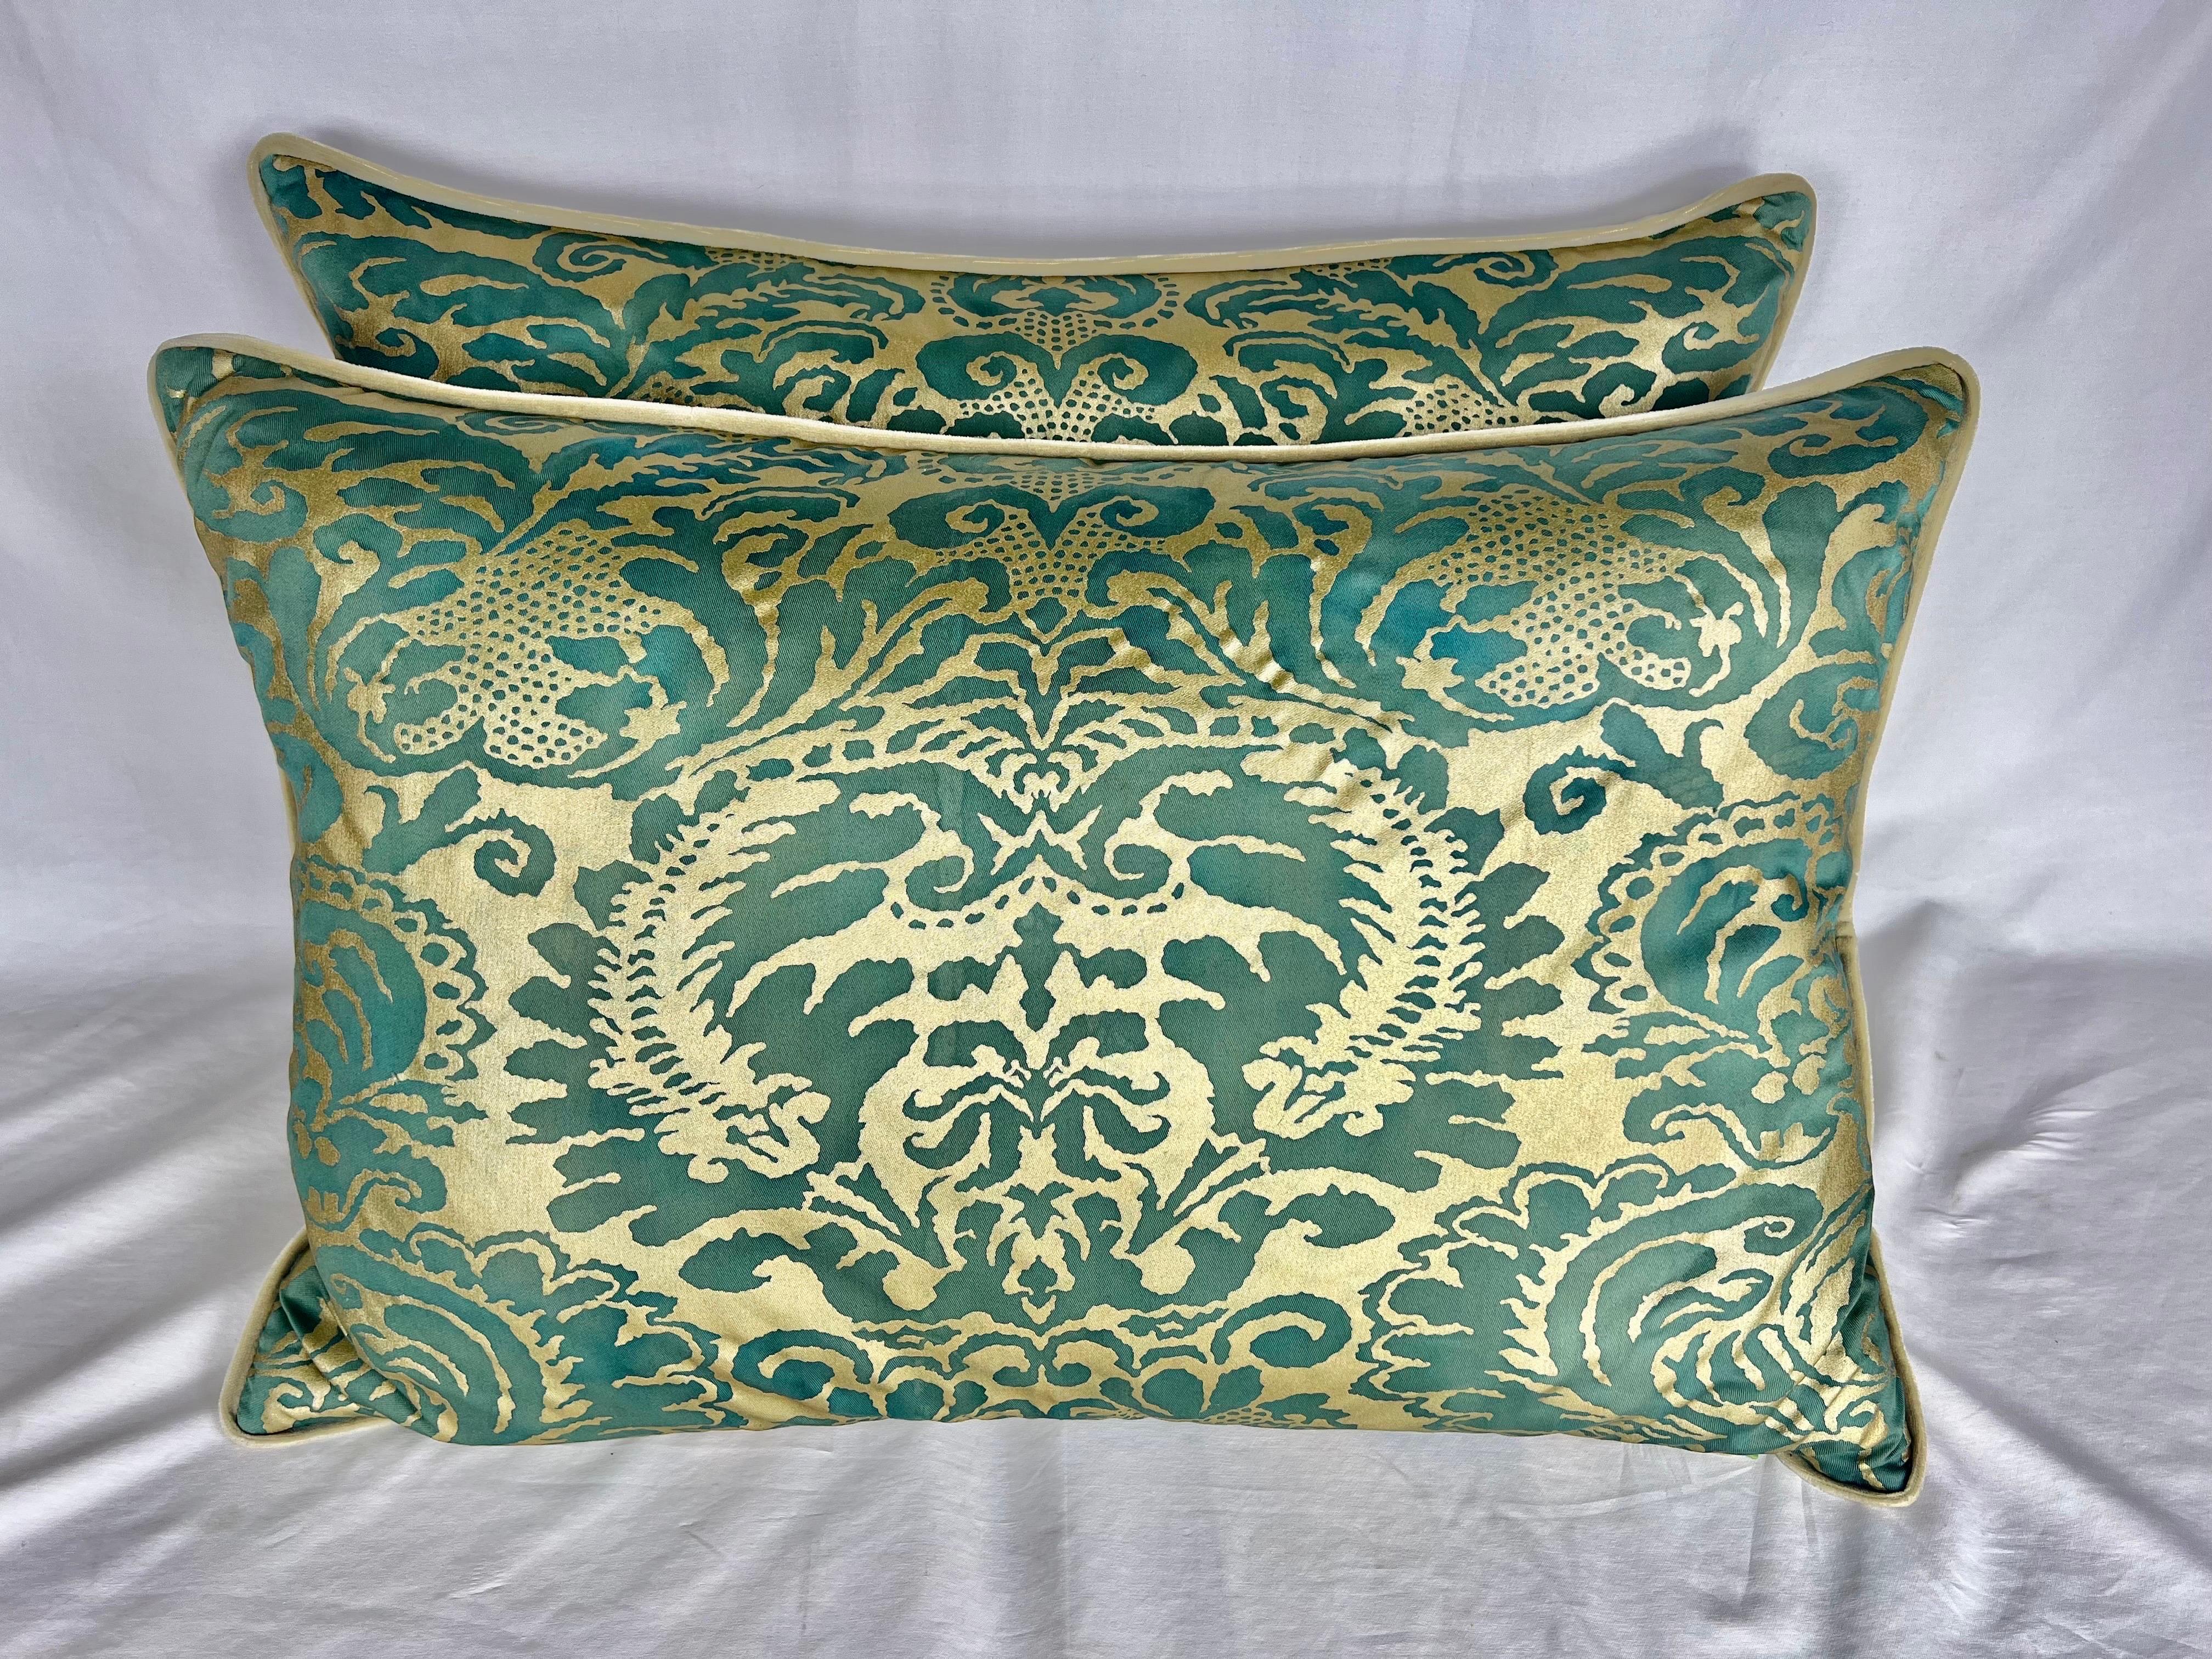 Pair of custom pillows made with dark green and metallic gold Fortuny style fronts and cream velvet backs with self cording. Down insert and zipper closures.